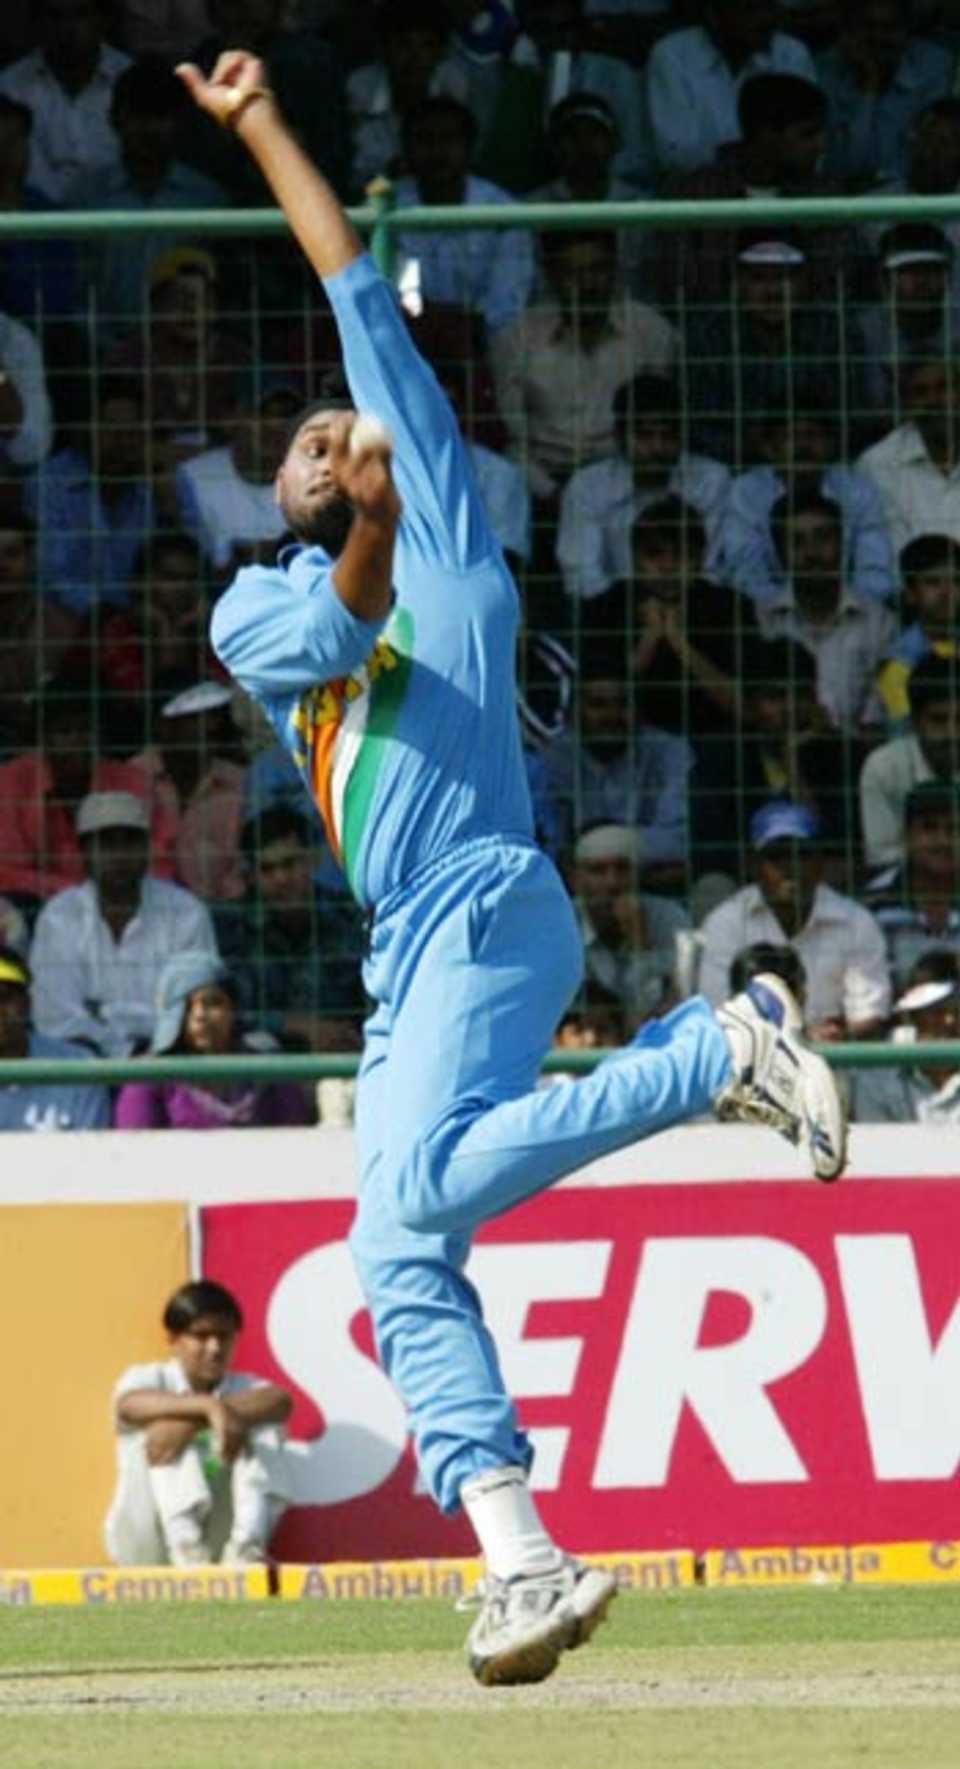 Harbhajan Singh in his delivery stride